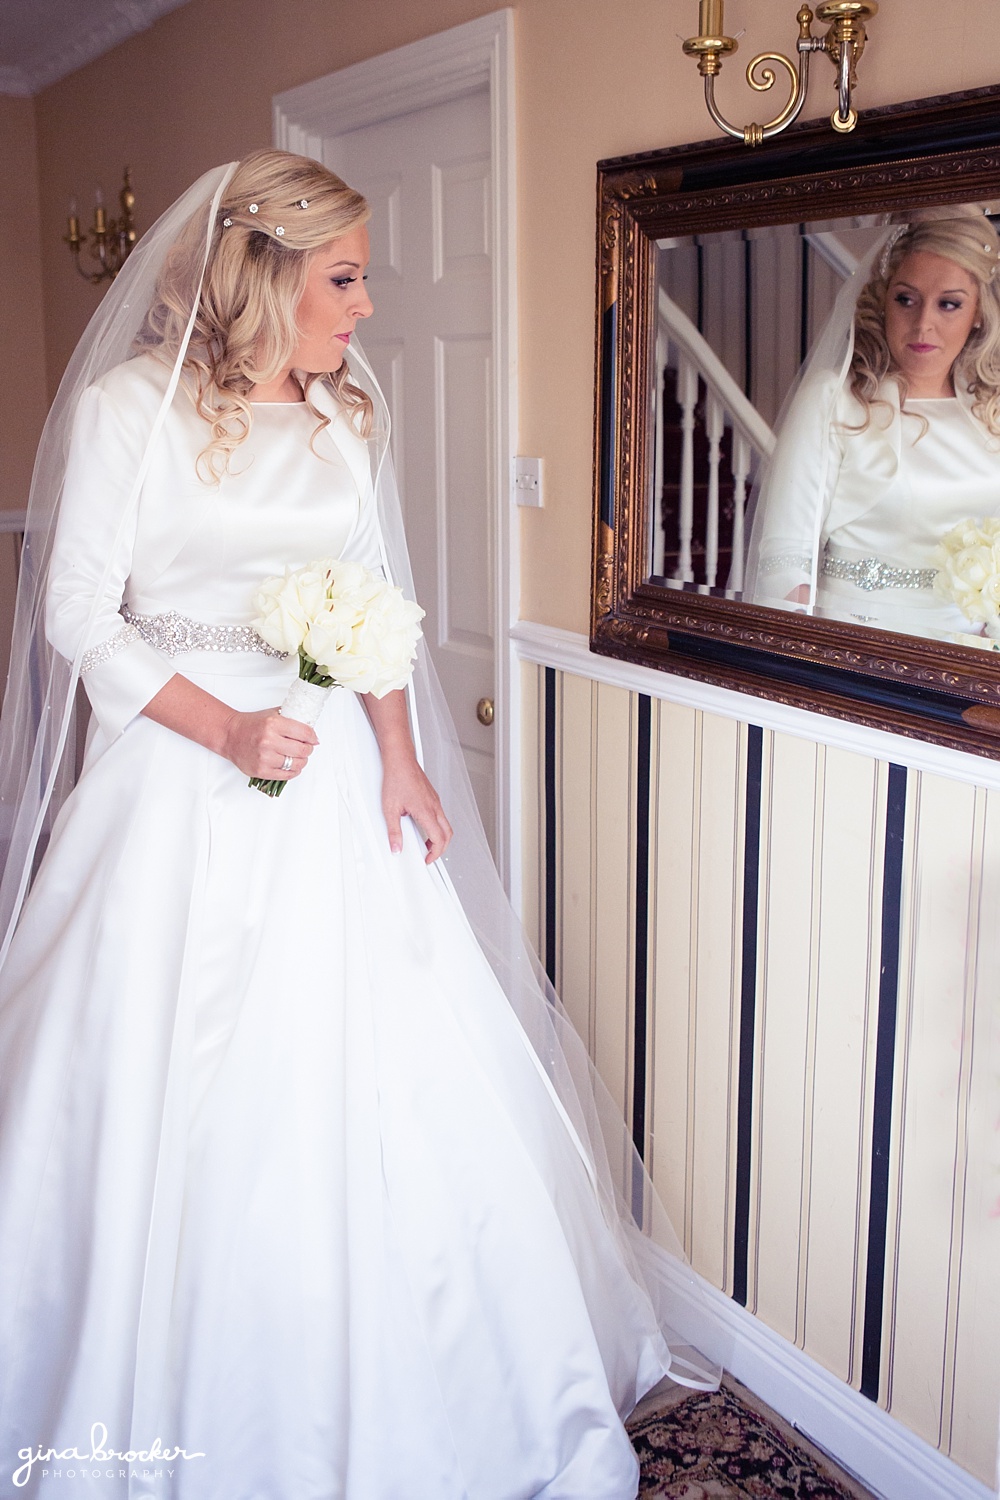 Classic Bride looks in the mirror before heading to the church for the ceremony